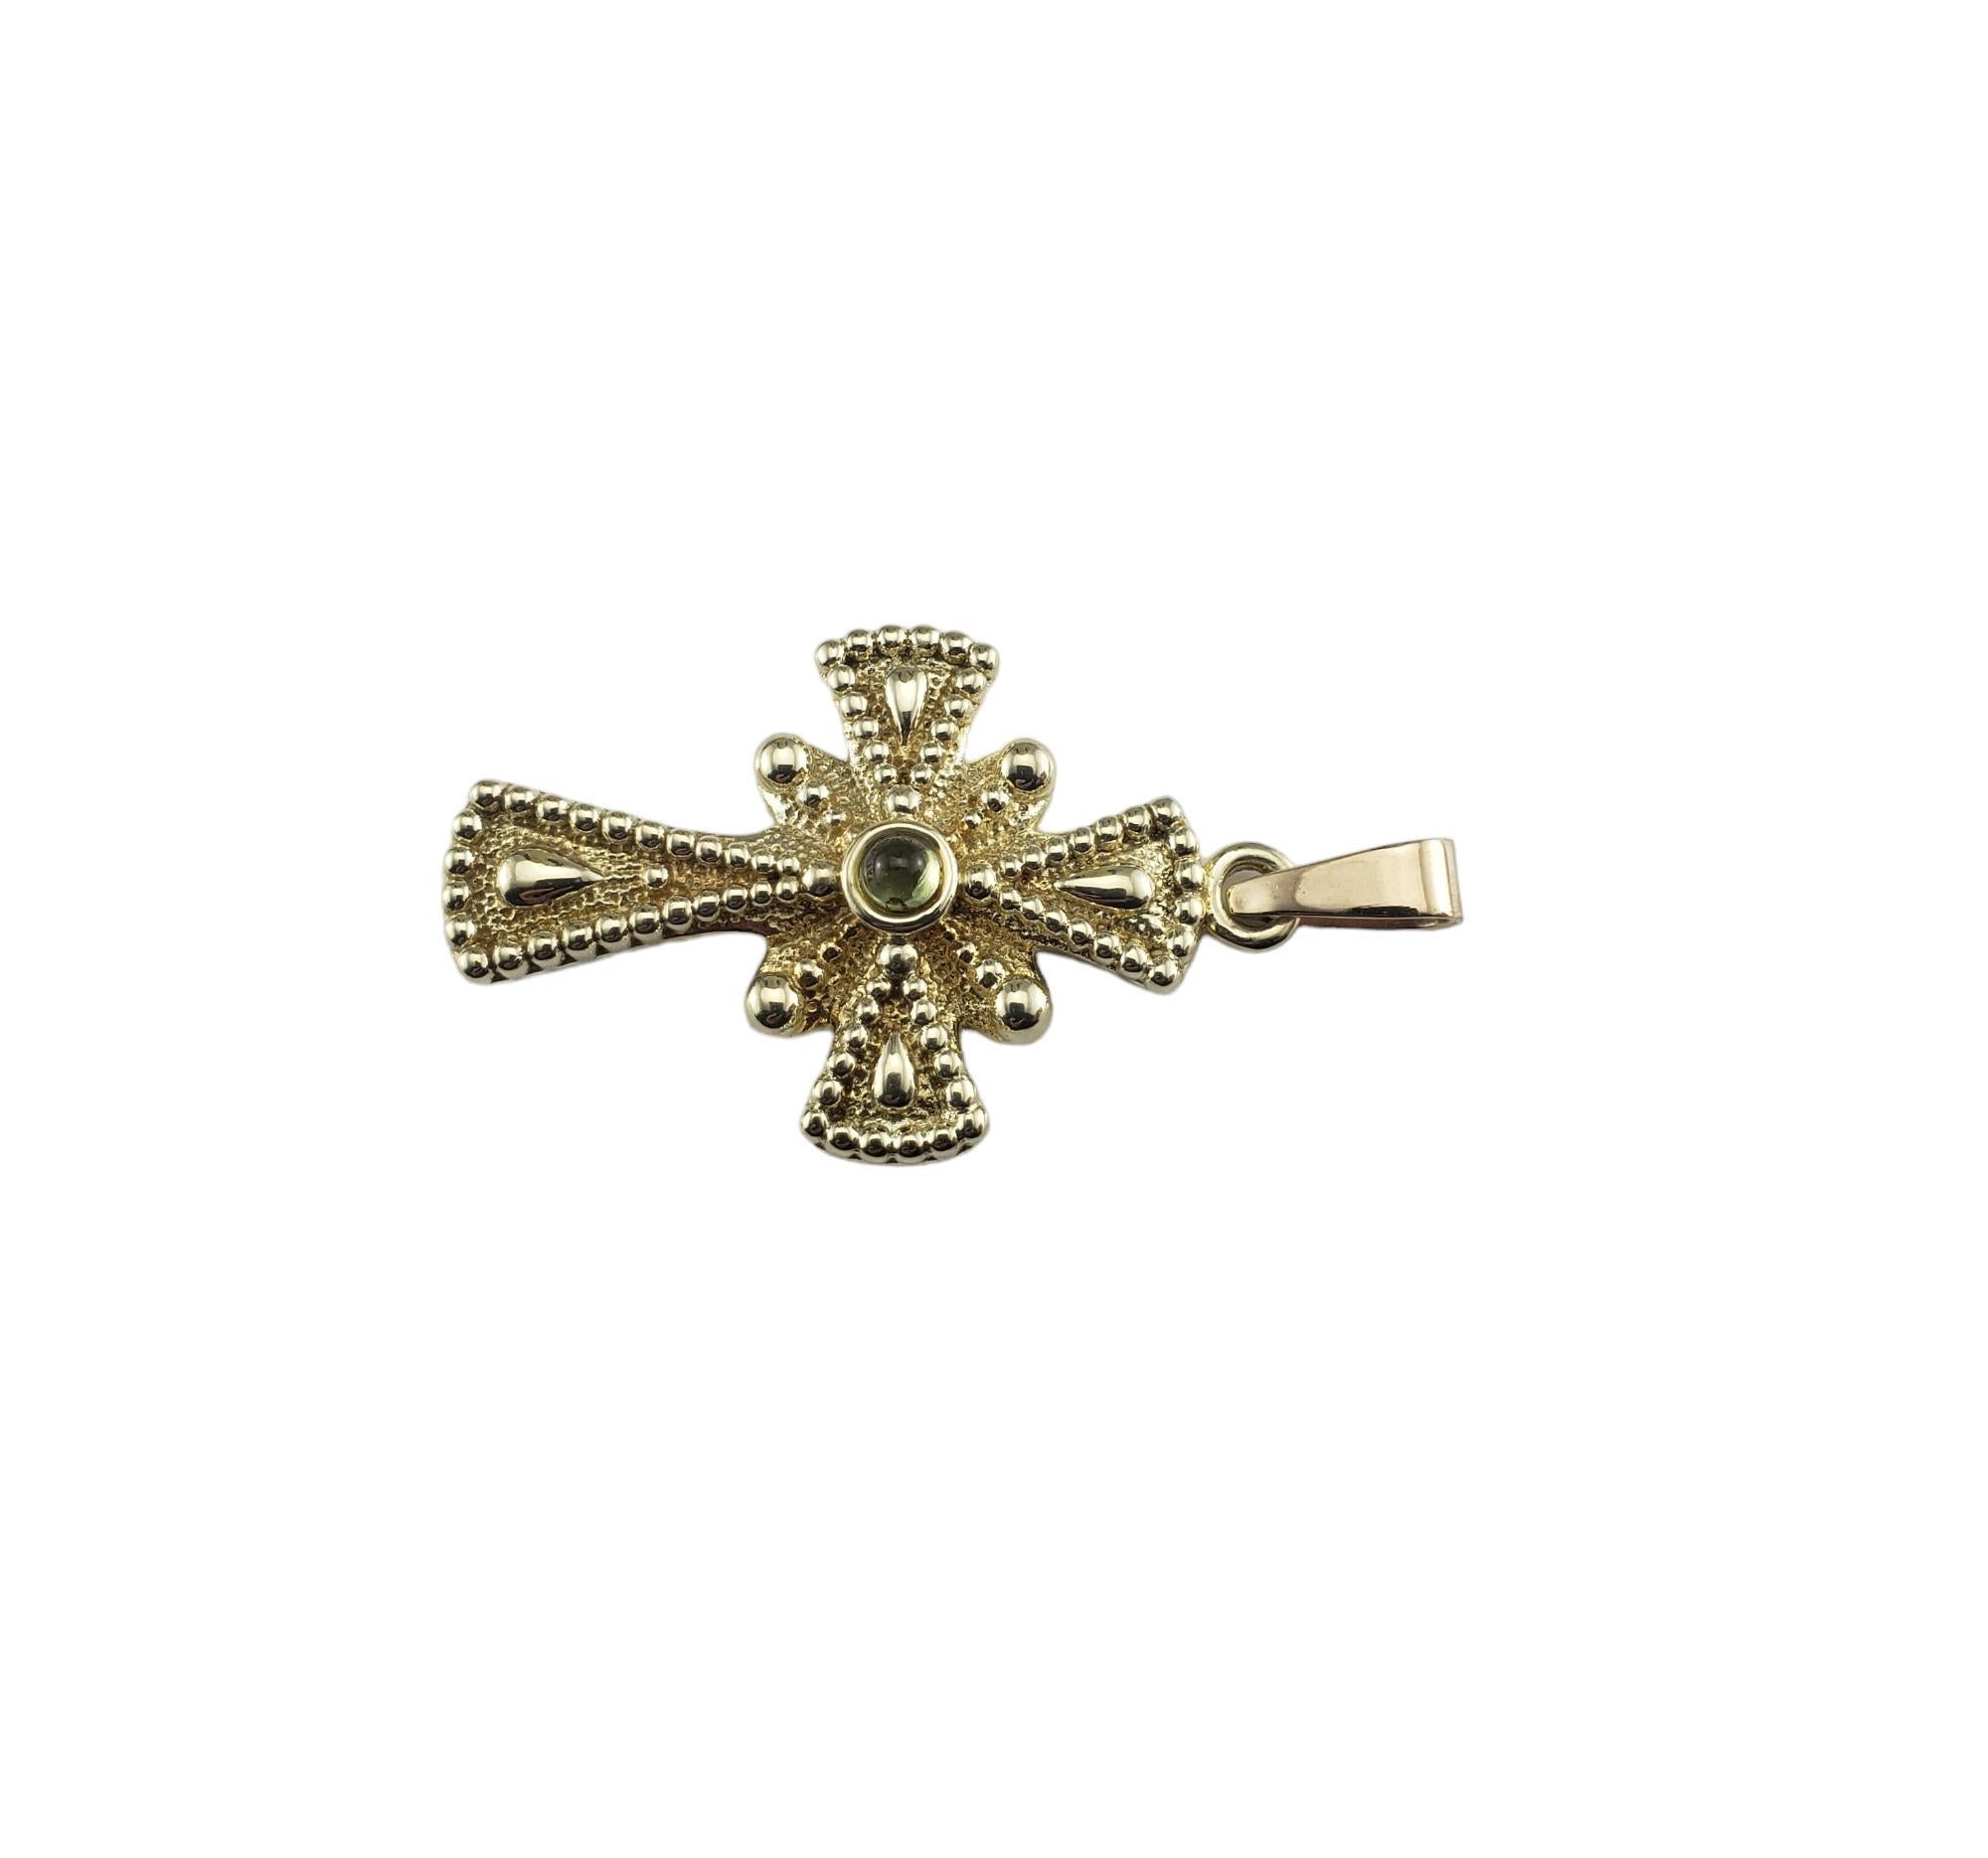 Vintage 14K Yellow Gold Cross Pendant-

This elegant cross pendant features one pale green cabochon stone set in beautifully detailed 14K yellow gold.

Size: 38 mm x 25 mm

Stamped: 14K CHINA

Weight: 3.0 gr./ 1.9 dwt.

*Chain not included.

Very